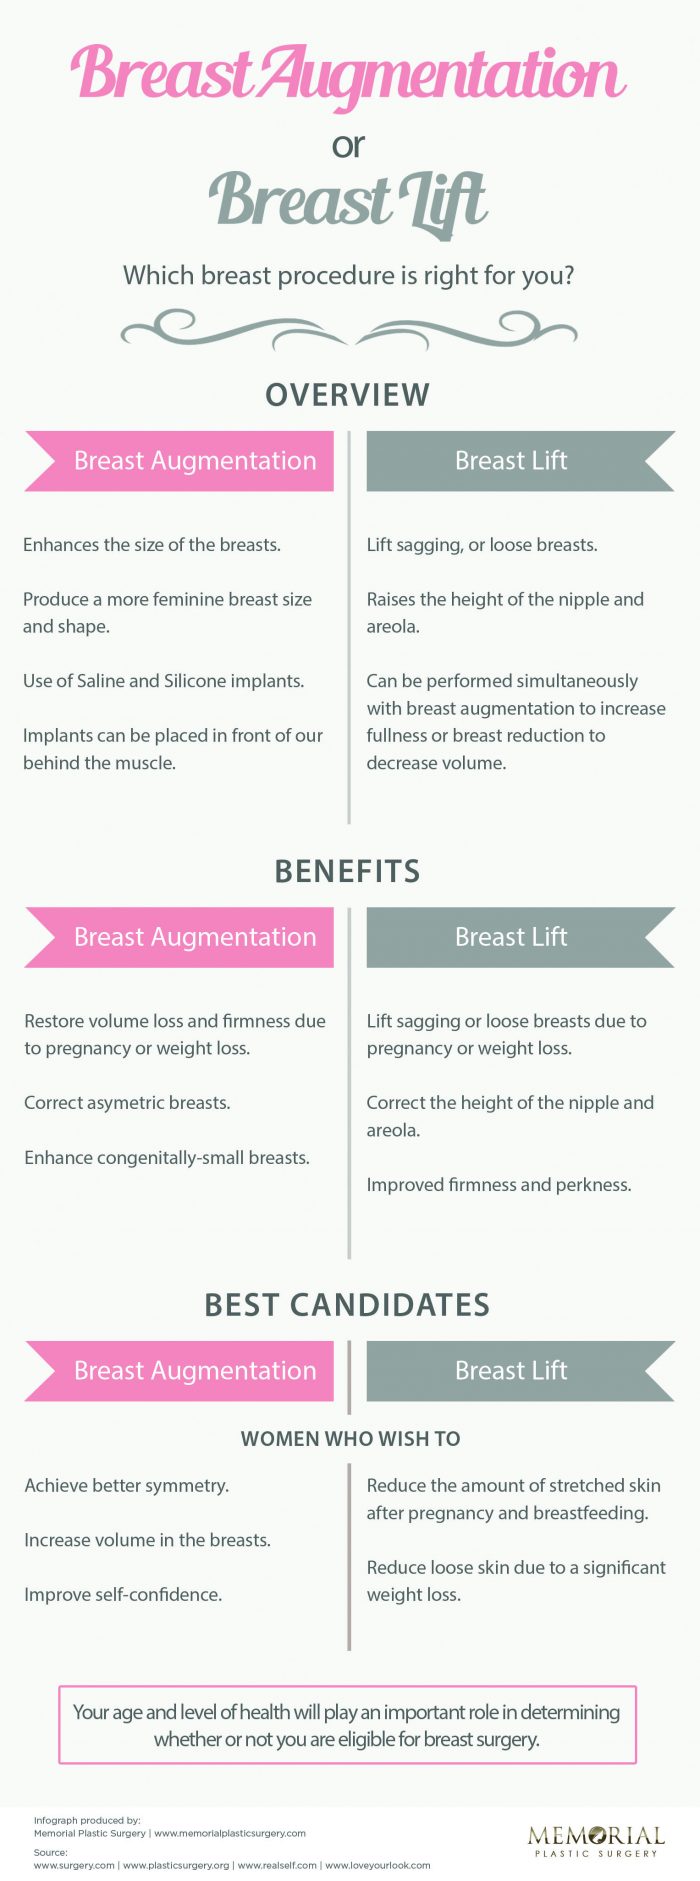 Does a Breast Lift Make My Breasts Smaller?